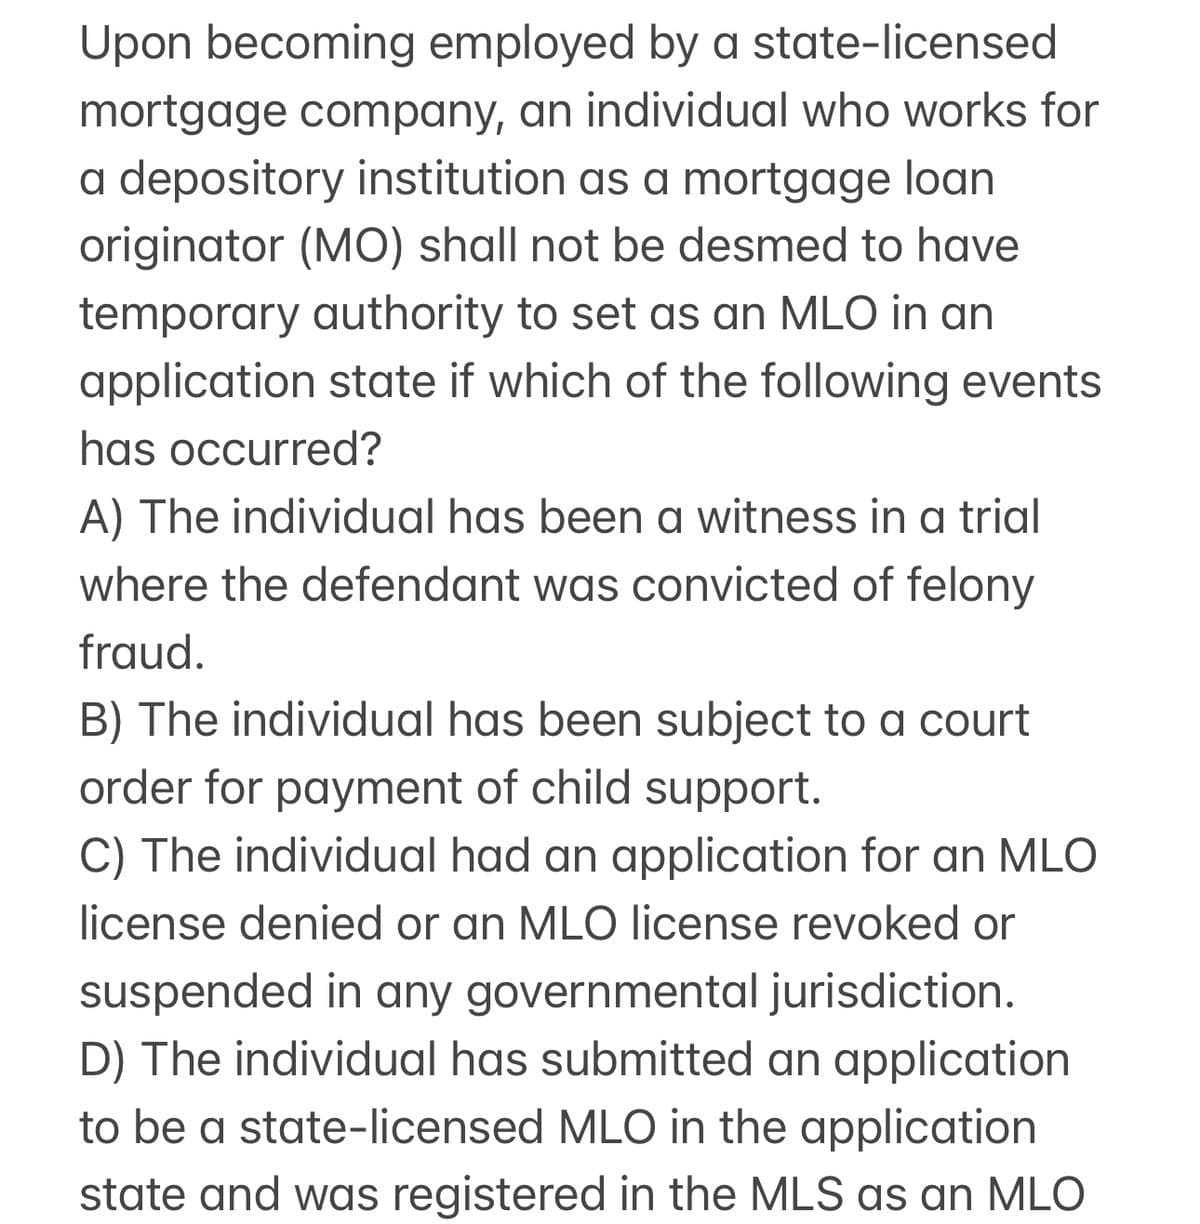 Upon becoming employed by a state-licensed
mortgage company, an individual who works for
a depository institution as a mortgage loan
originator (MO) shall not be desmed to have
temporary authority to set as an MLO in an
application state if which of the following events
has occurred?
A) The individual has been a witness in a trial
where the defendant was convicted of felony
fraud.
B) The individual has been subject to a court
order for payment of child support.
C) The individual had an application for an MLO
license denied or an MLO license revoked or
suspended in any governmental jurisdiction.
D) The individual has submitted an application
to be a state-licensed MLO in the application
state and was registered in the MLS as an MLO